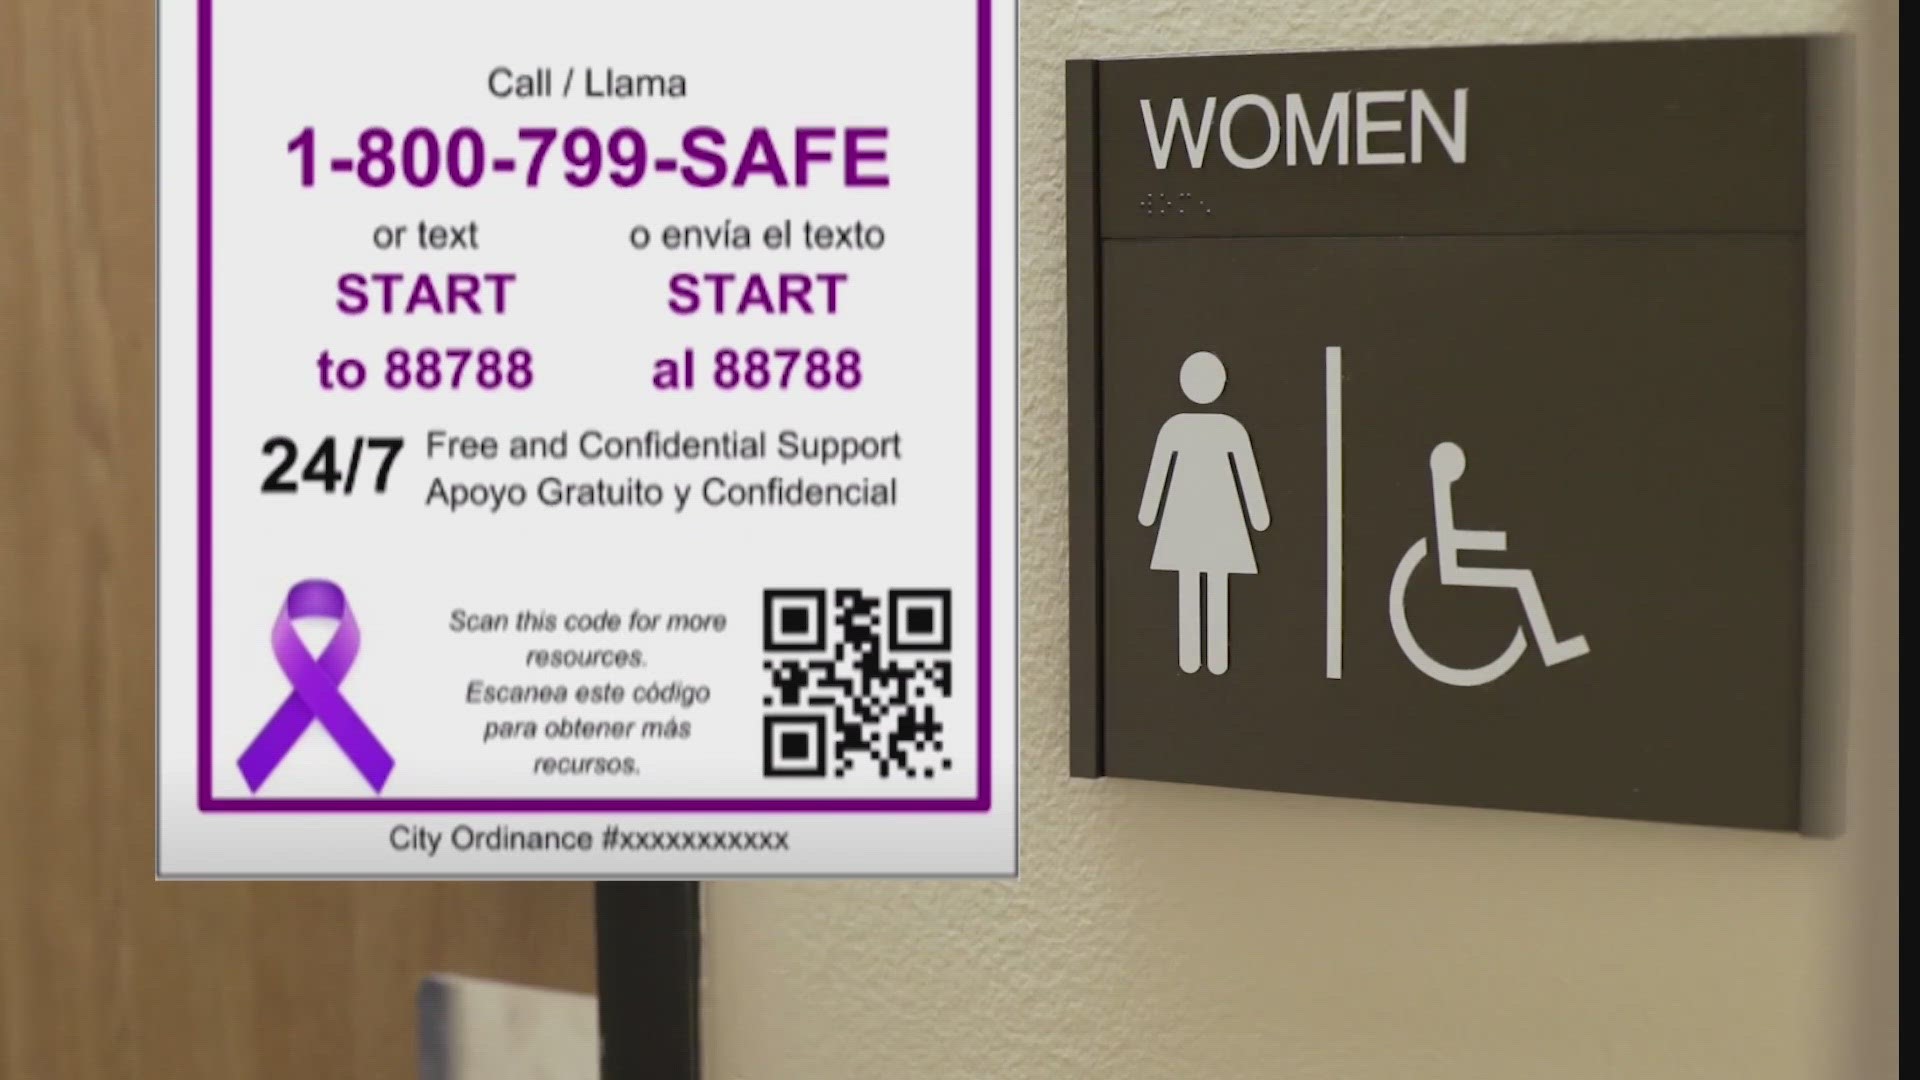 The San Antonio City Council passed a new ordinance Thursday to help reach domestic violence victims across the city.